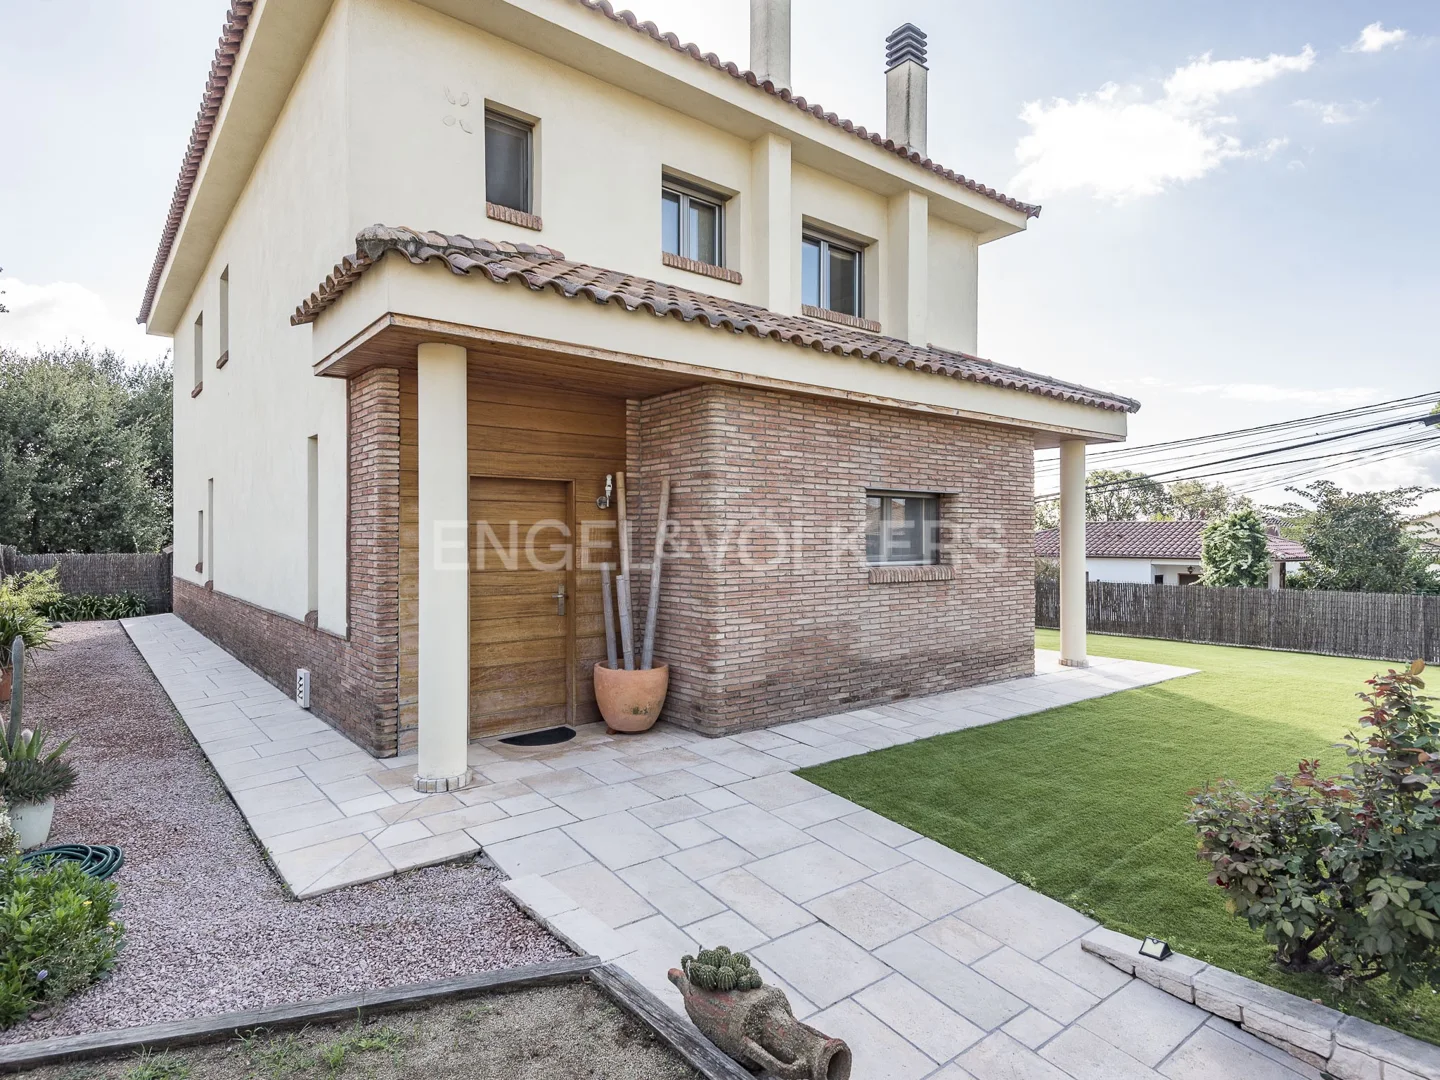 Spacious detached house in the "Faldes del Montseny".